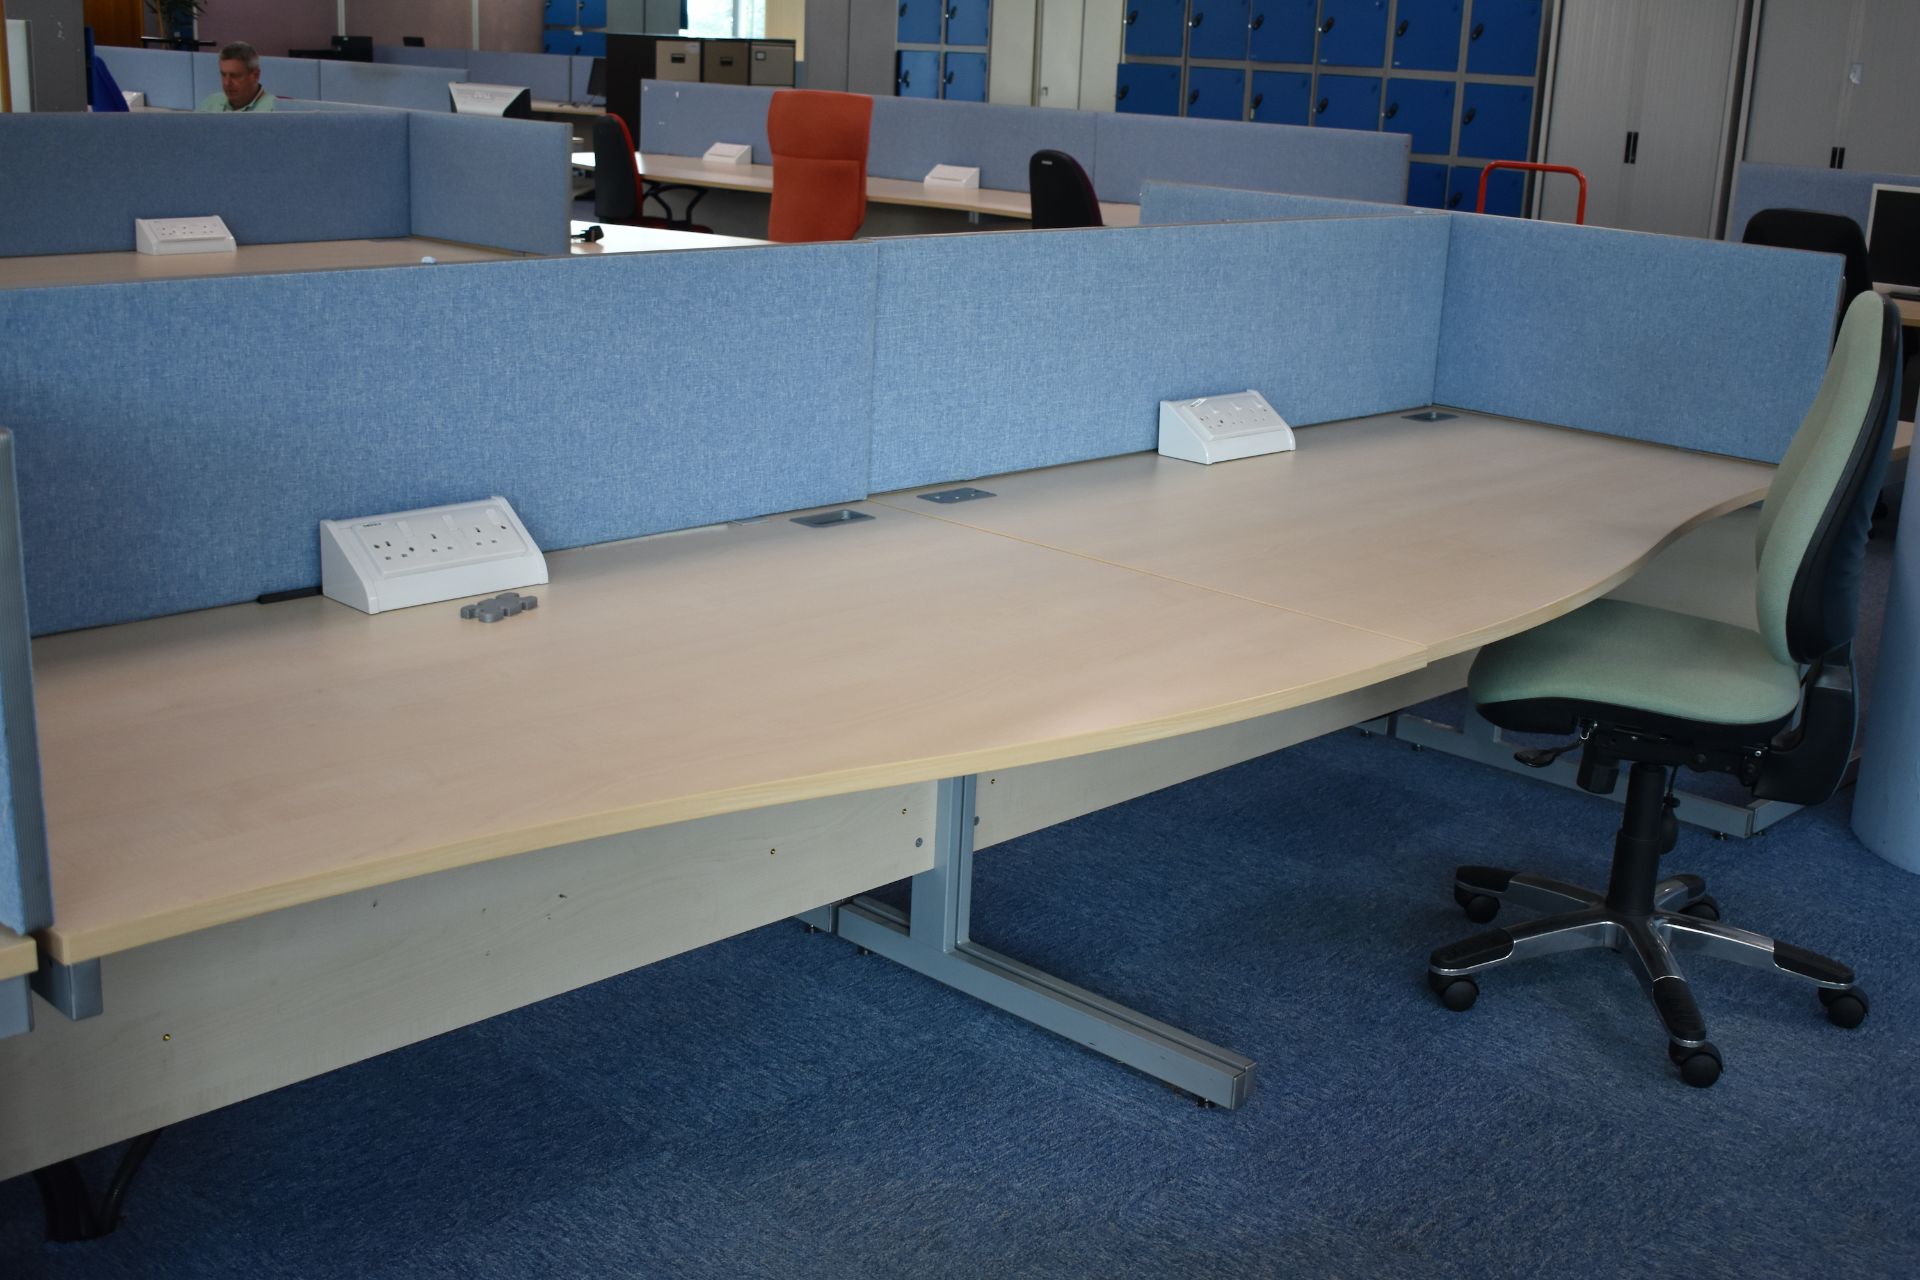 Hardwired Desk LH x3 & RH x3, Desk Screen Qty 4, Task Chair Qty 2, Low hinged door cabinet Qty 2 - Image 10 of 11